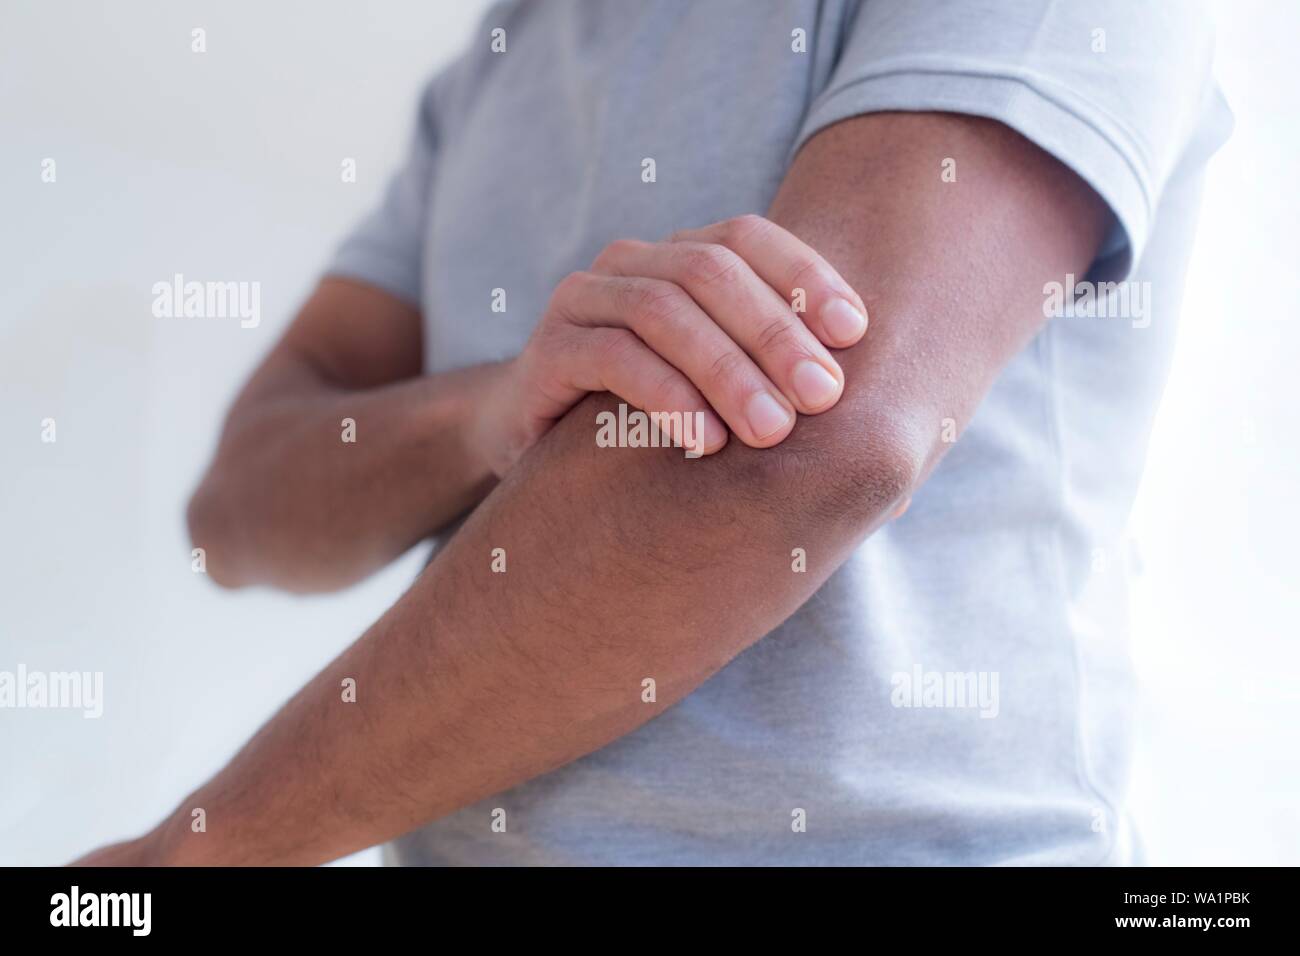 Man touching his elbow in pain. Stock Photo